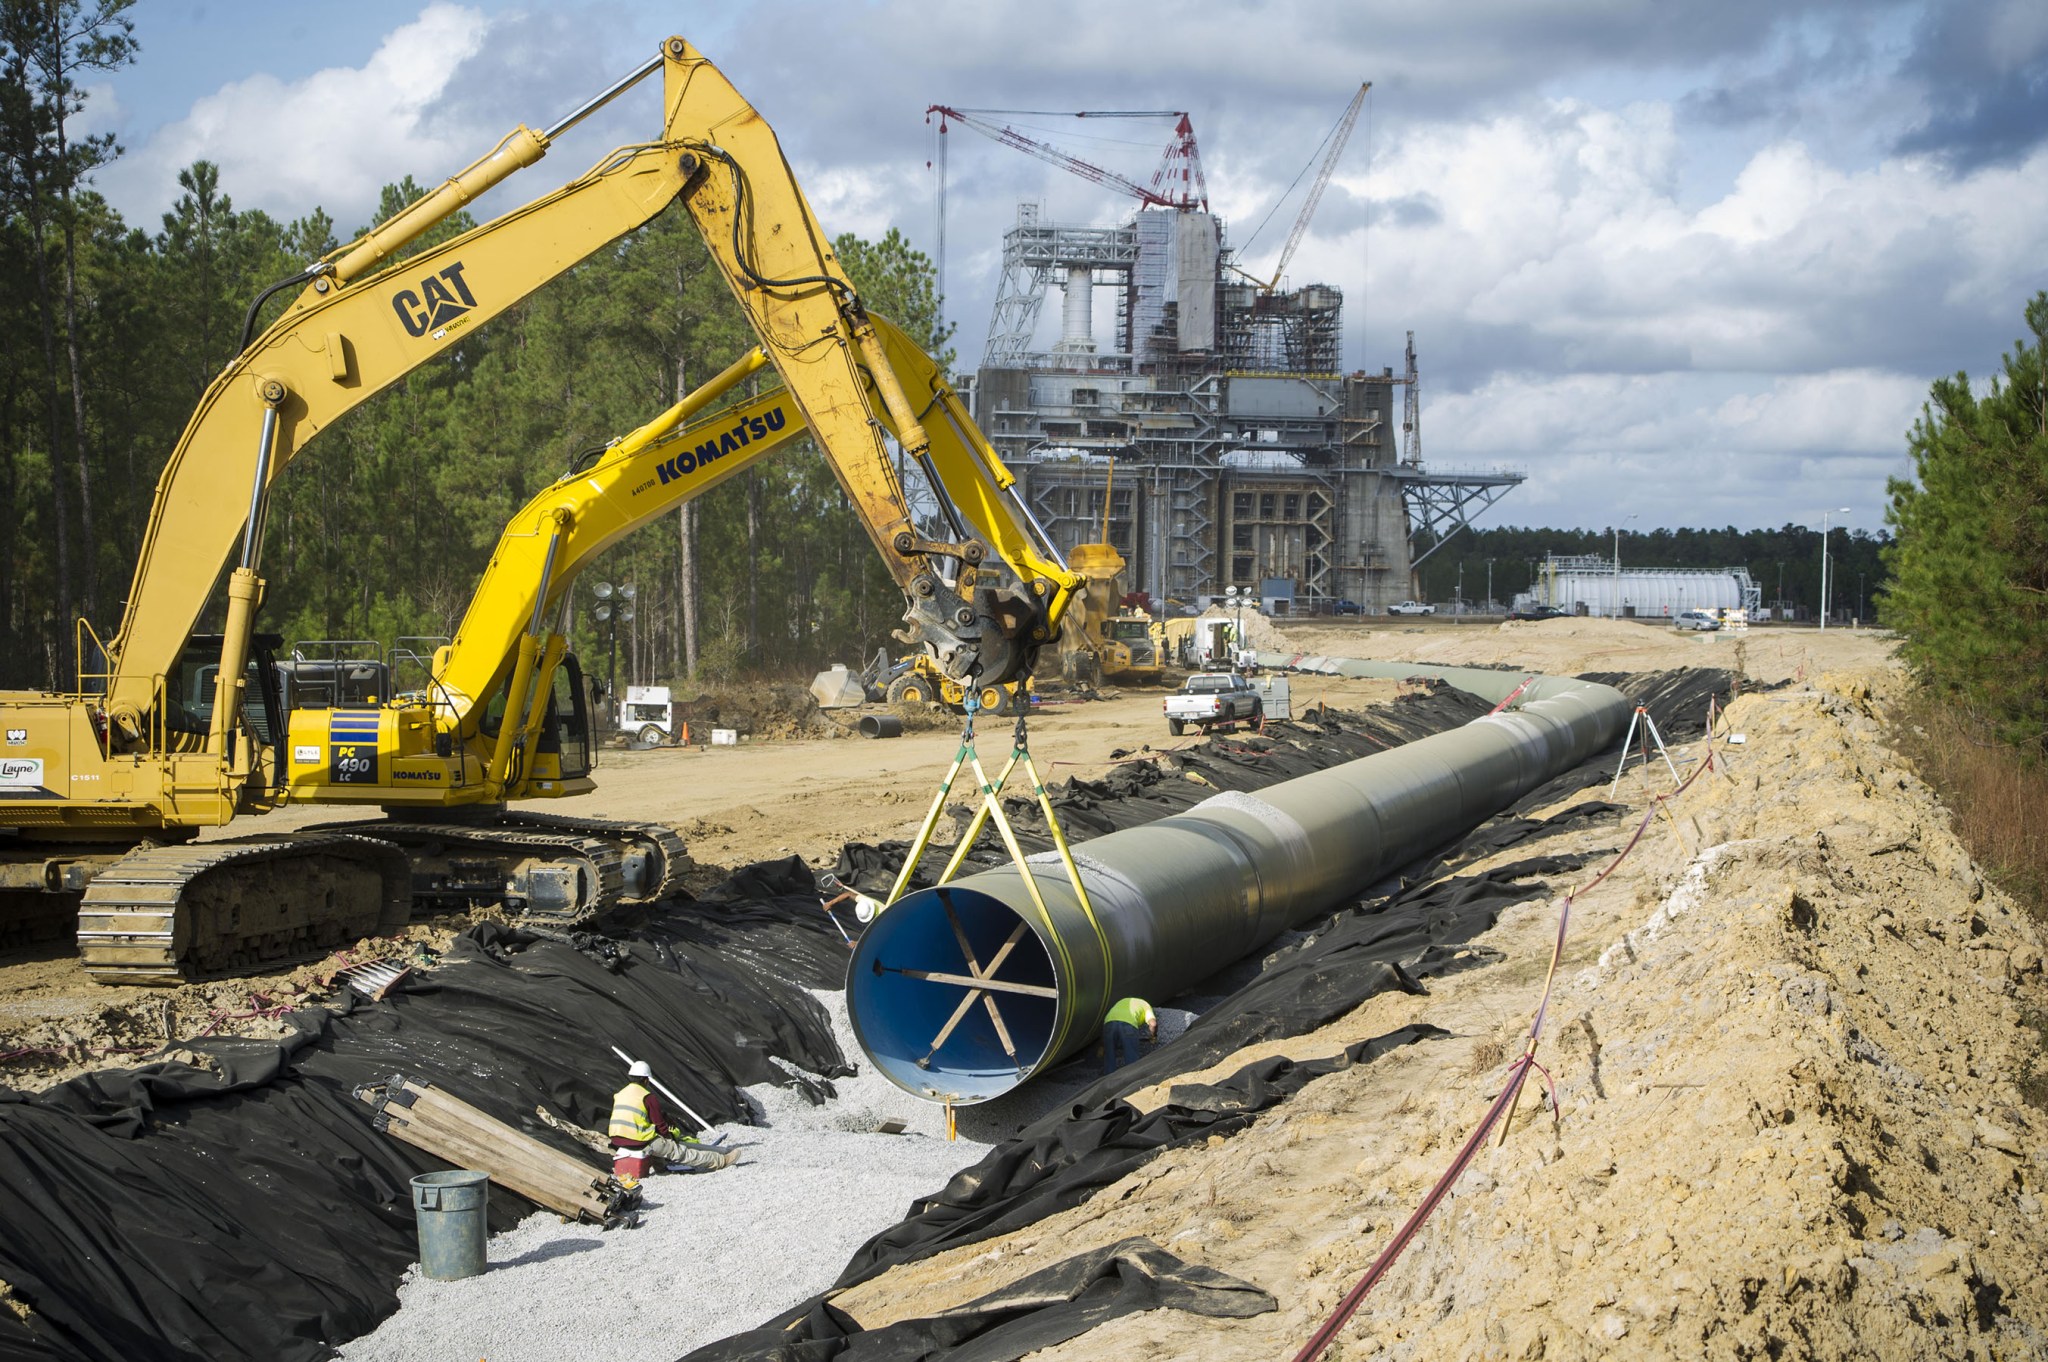 Water piping is installed near the B-1/B-2 Test Stand at Stennis Space Center